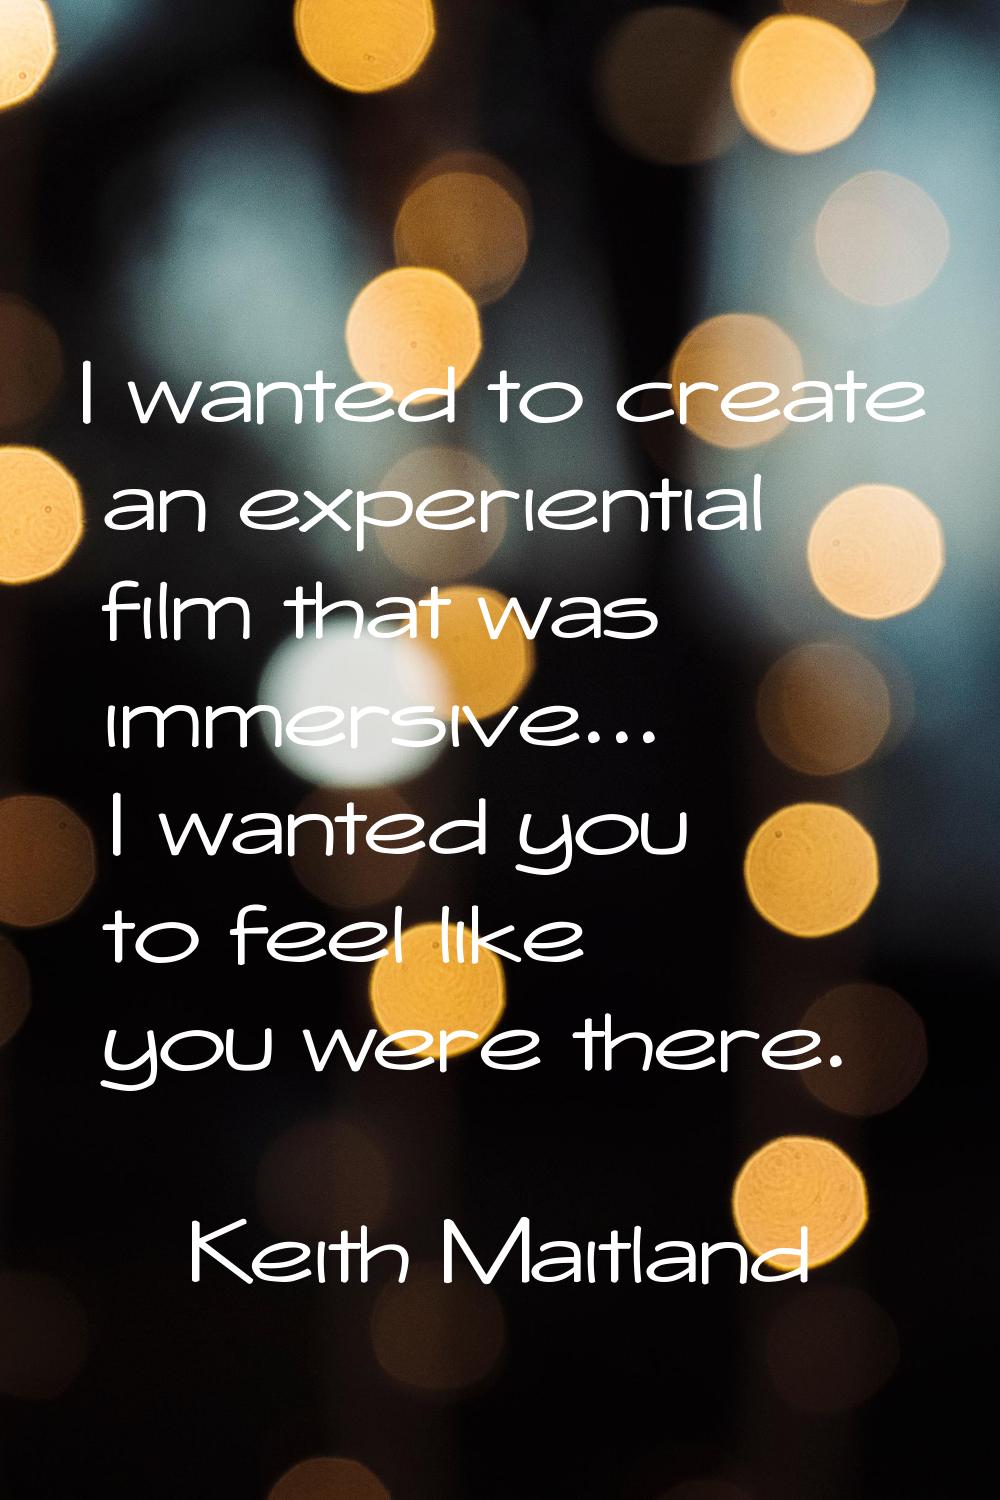 I wanted to create an experiential film that was immersive... I wanted you to feel like you were th